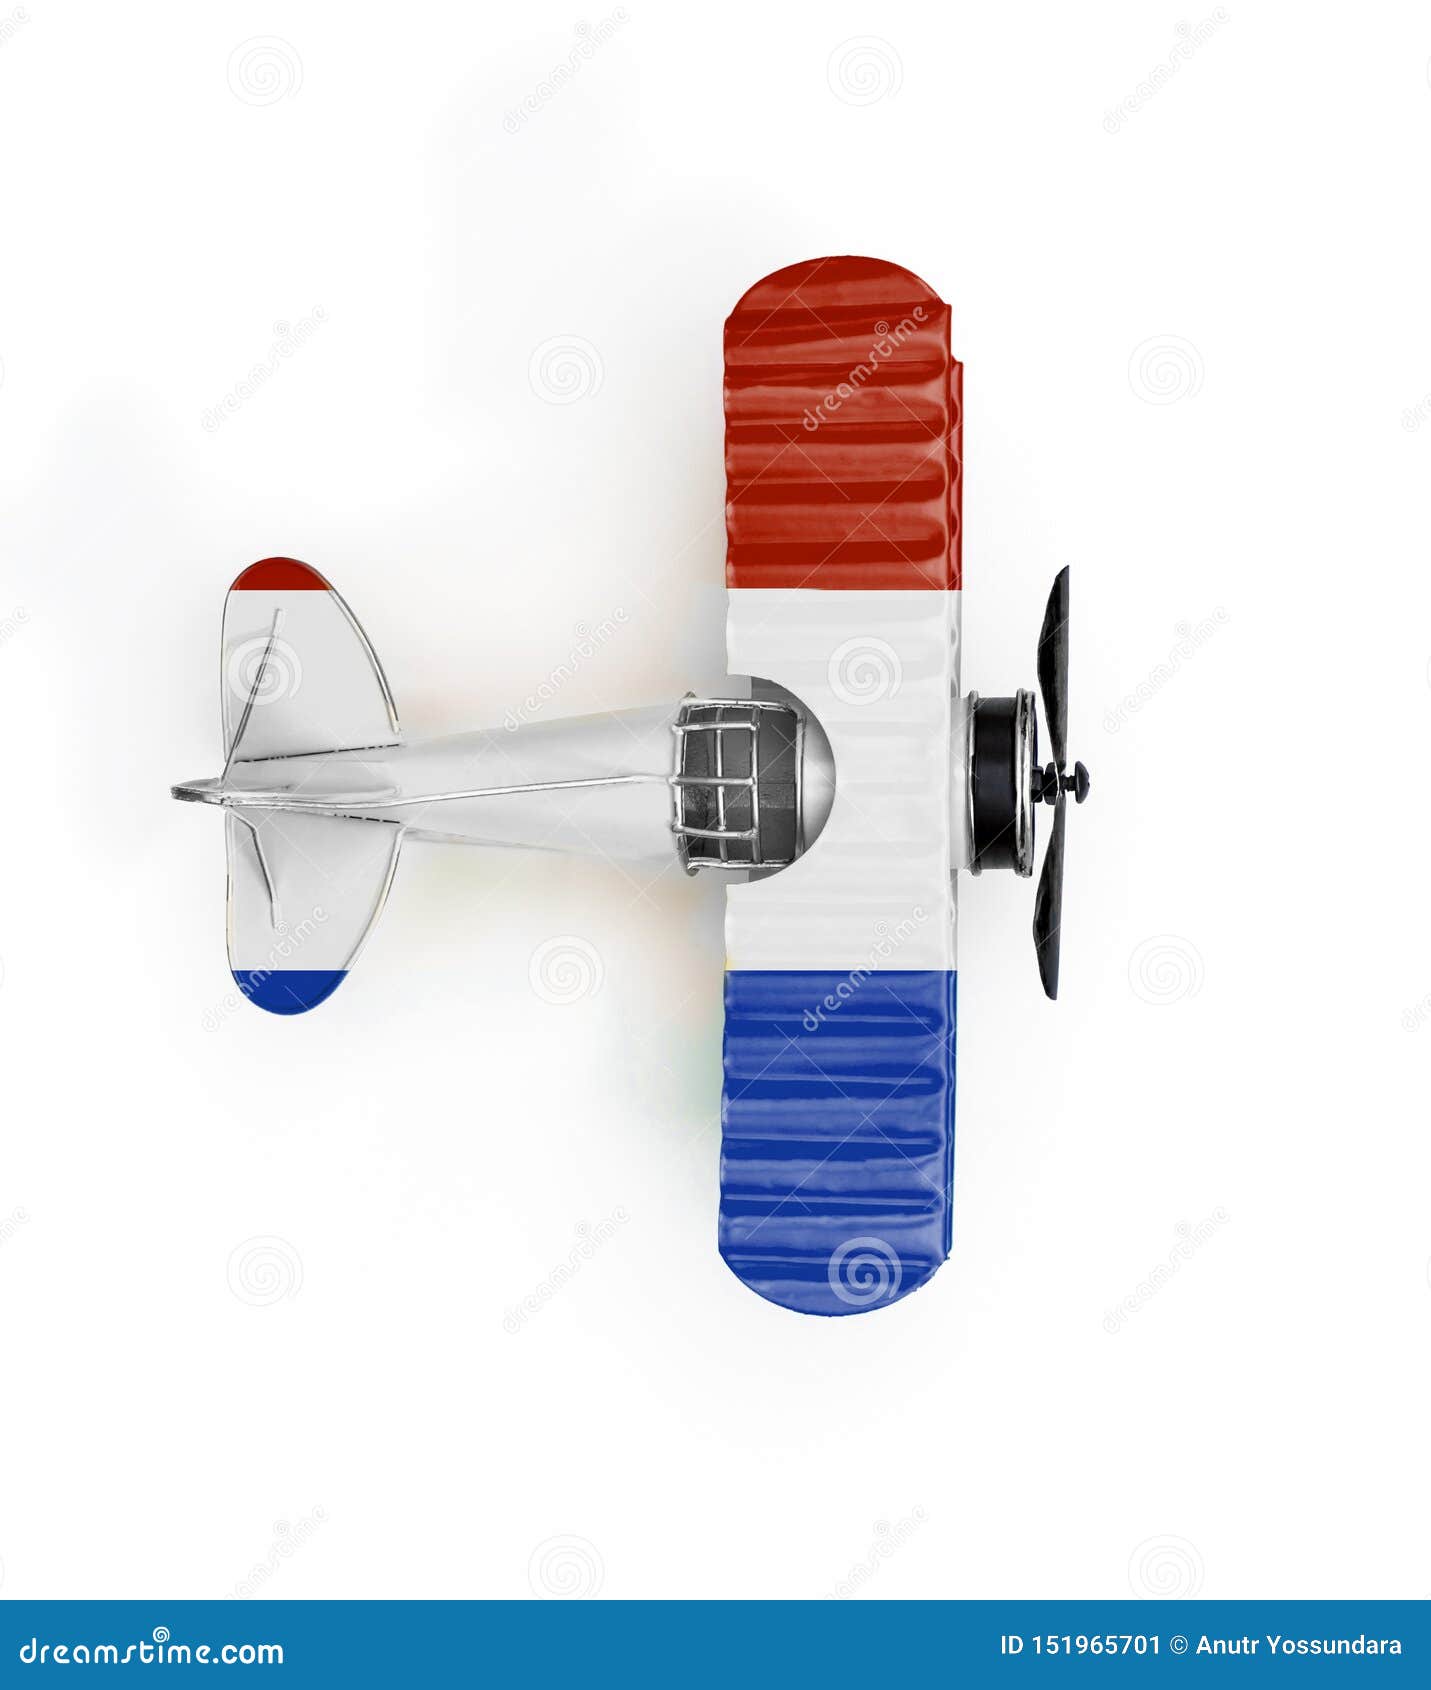 Flag of Netherlands Metal Toy Plane Isolated on White Stock Image ...